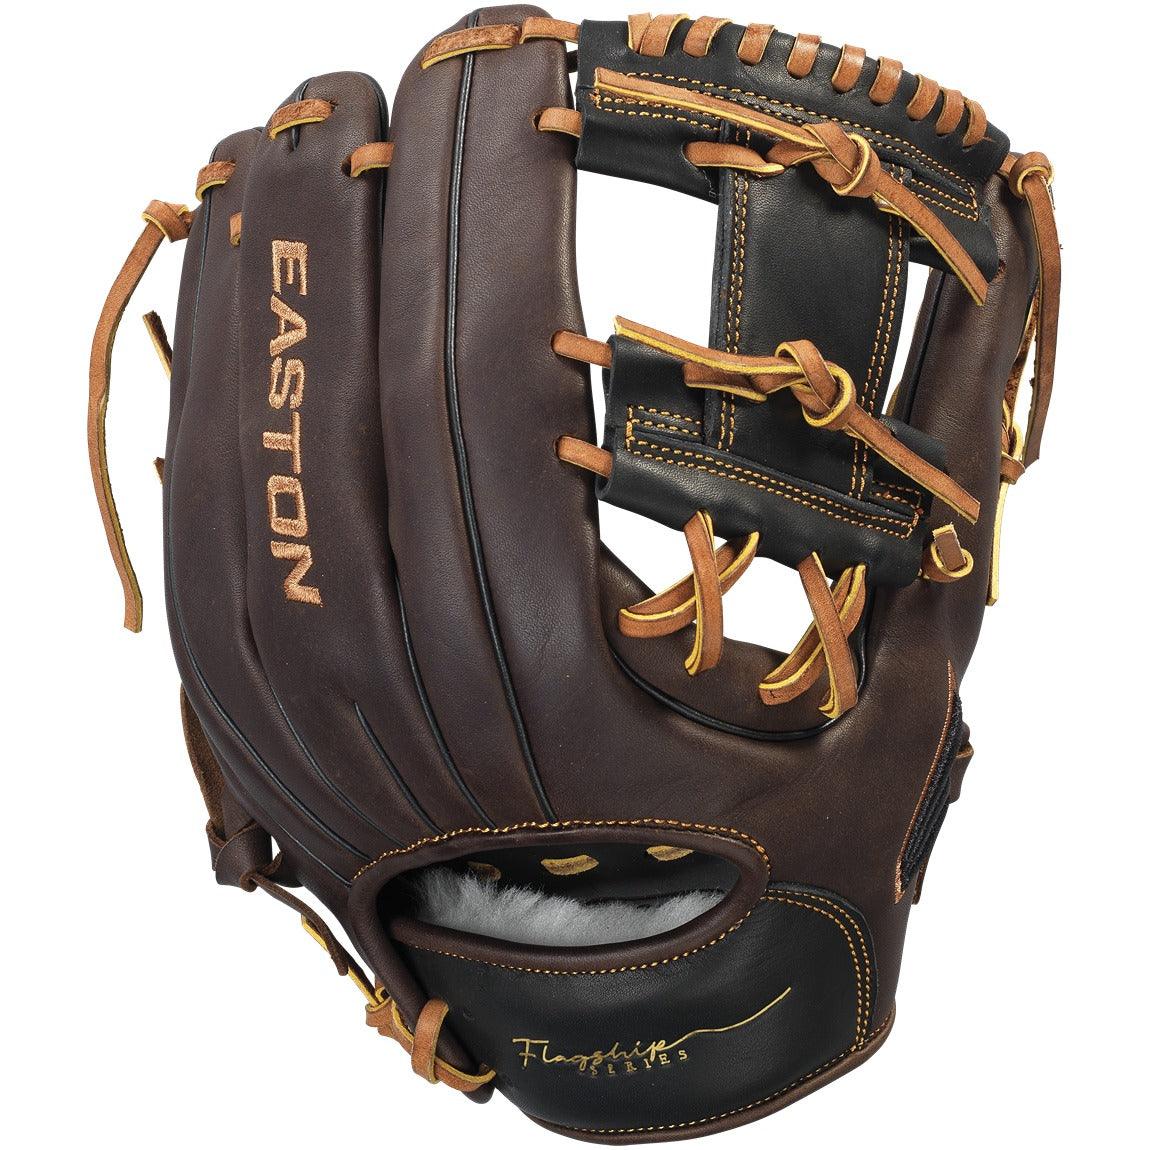 Flagship 11.5" Baseball Glove - Sports Excellence